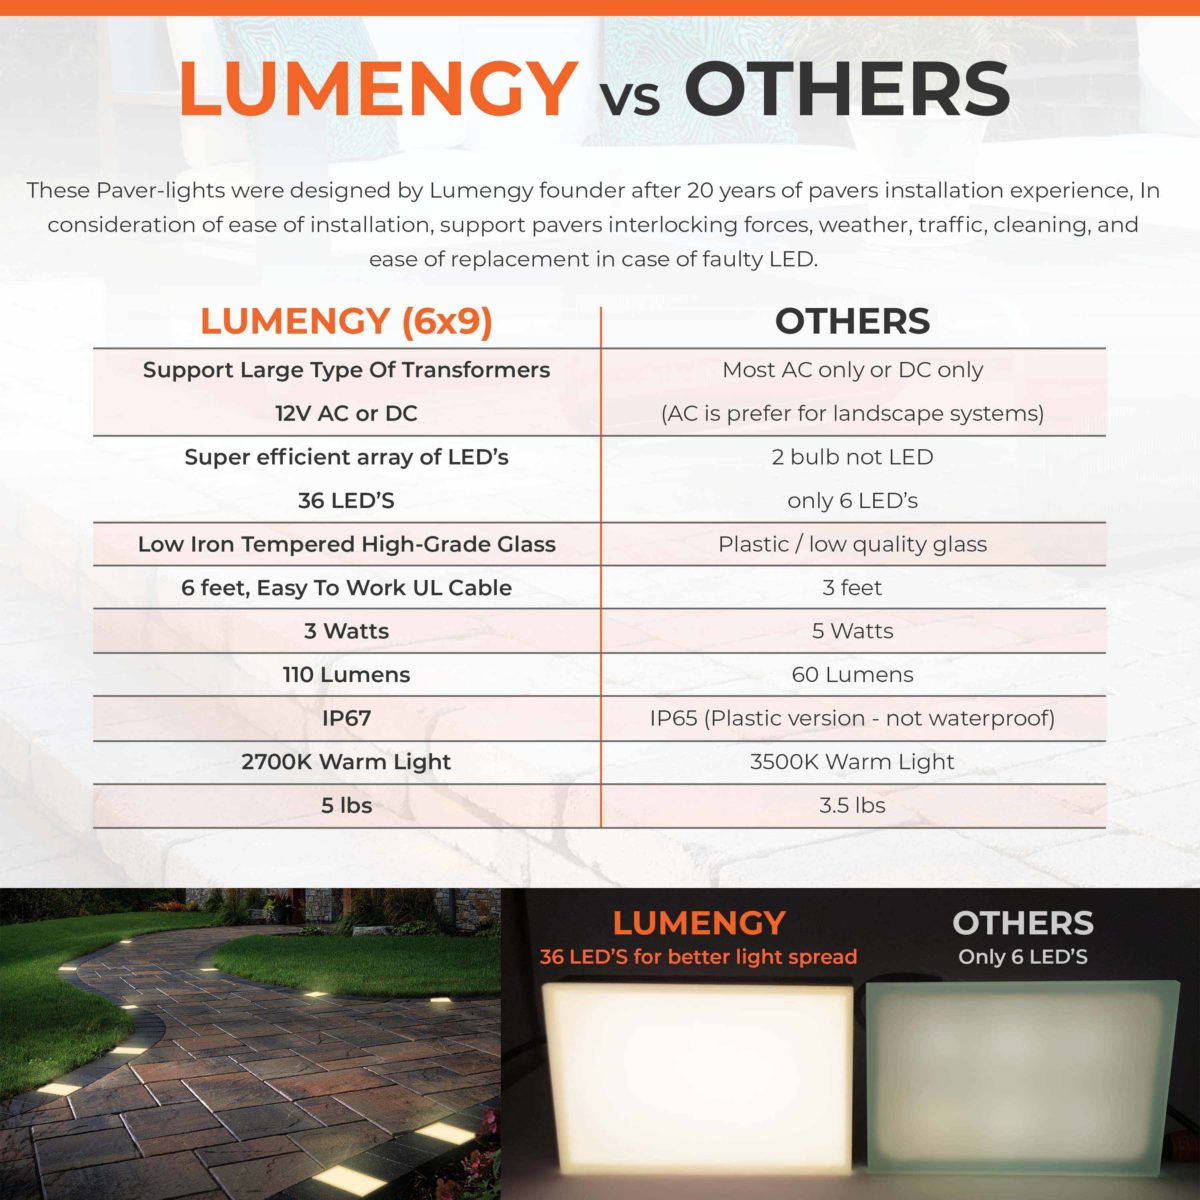 Comparison Table of Lumengy and Other Brands' Lights